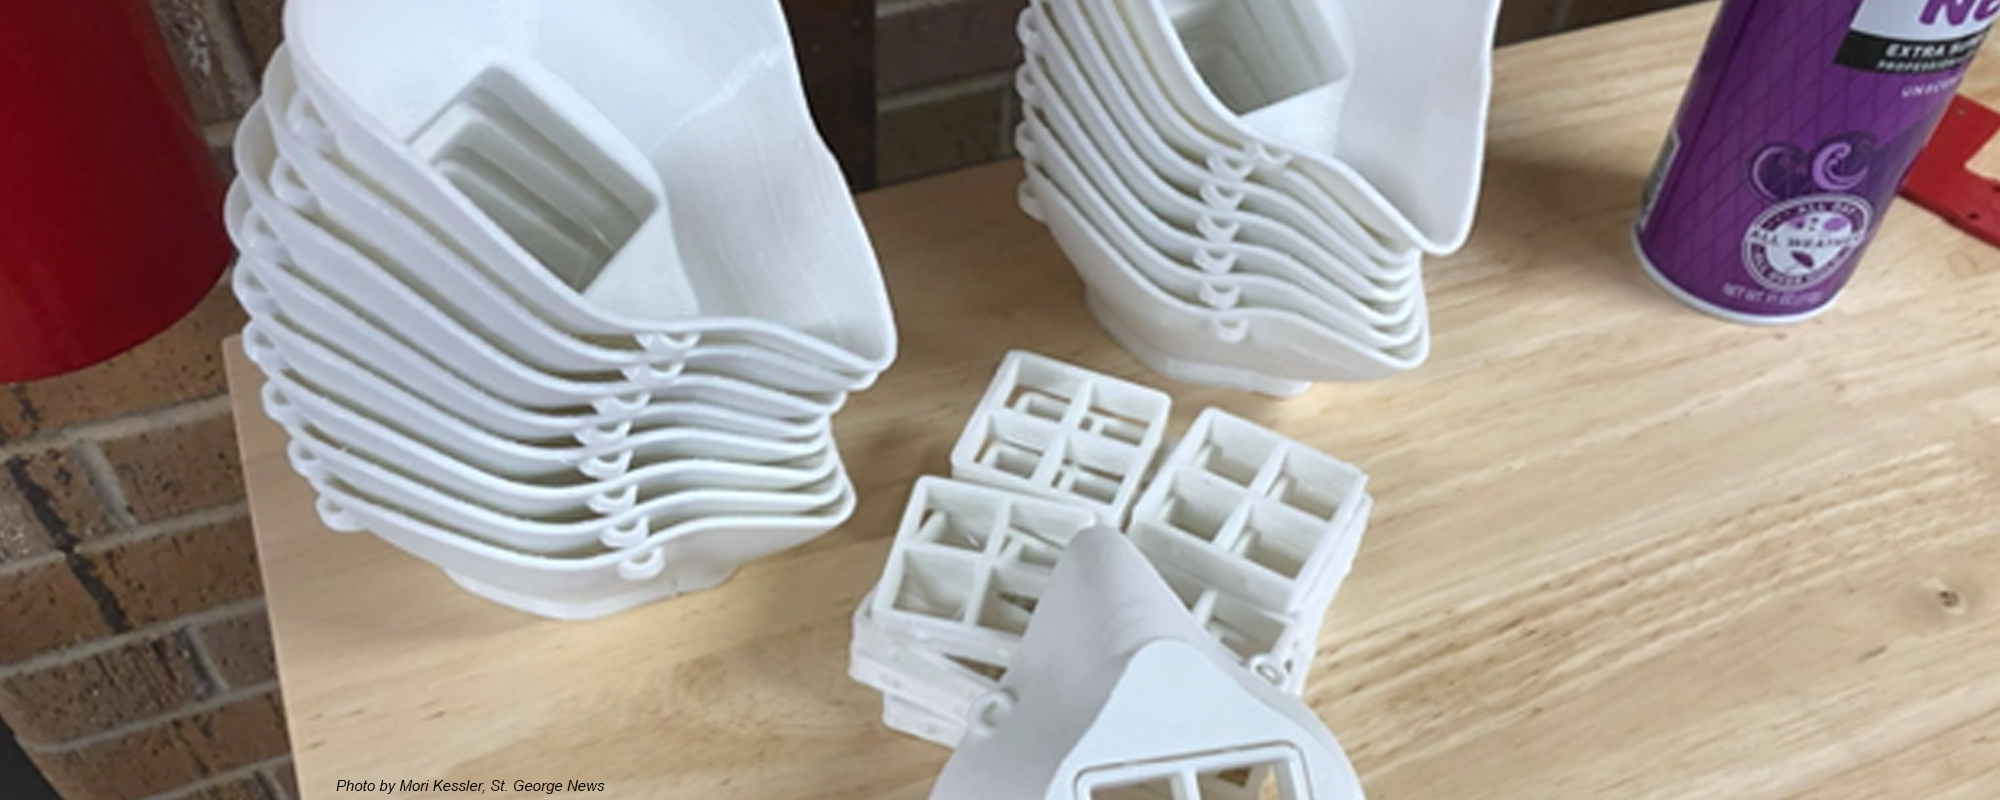 Featured image for “Innovation Plaza Provides 3D Printed Respirator Masks”